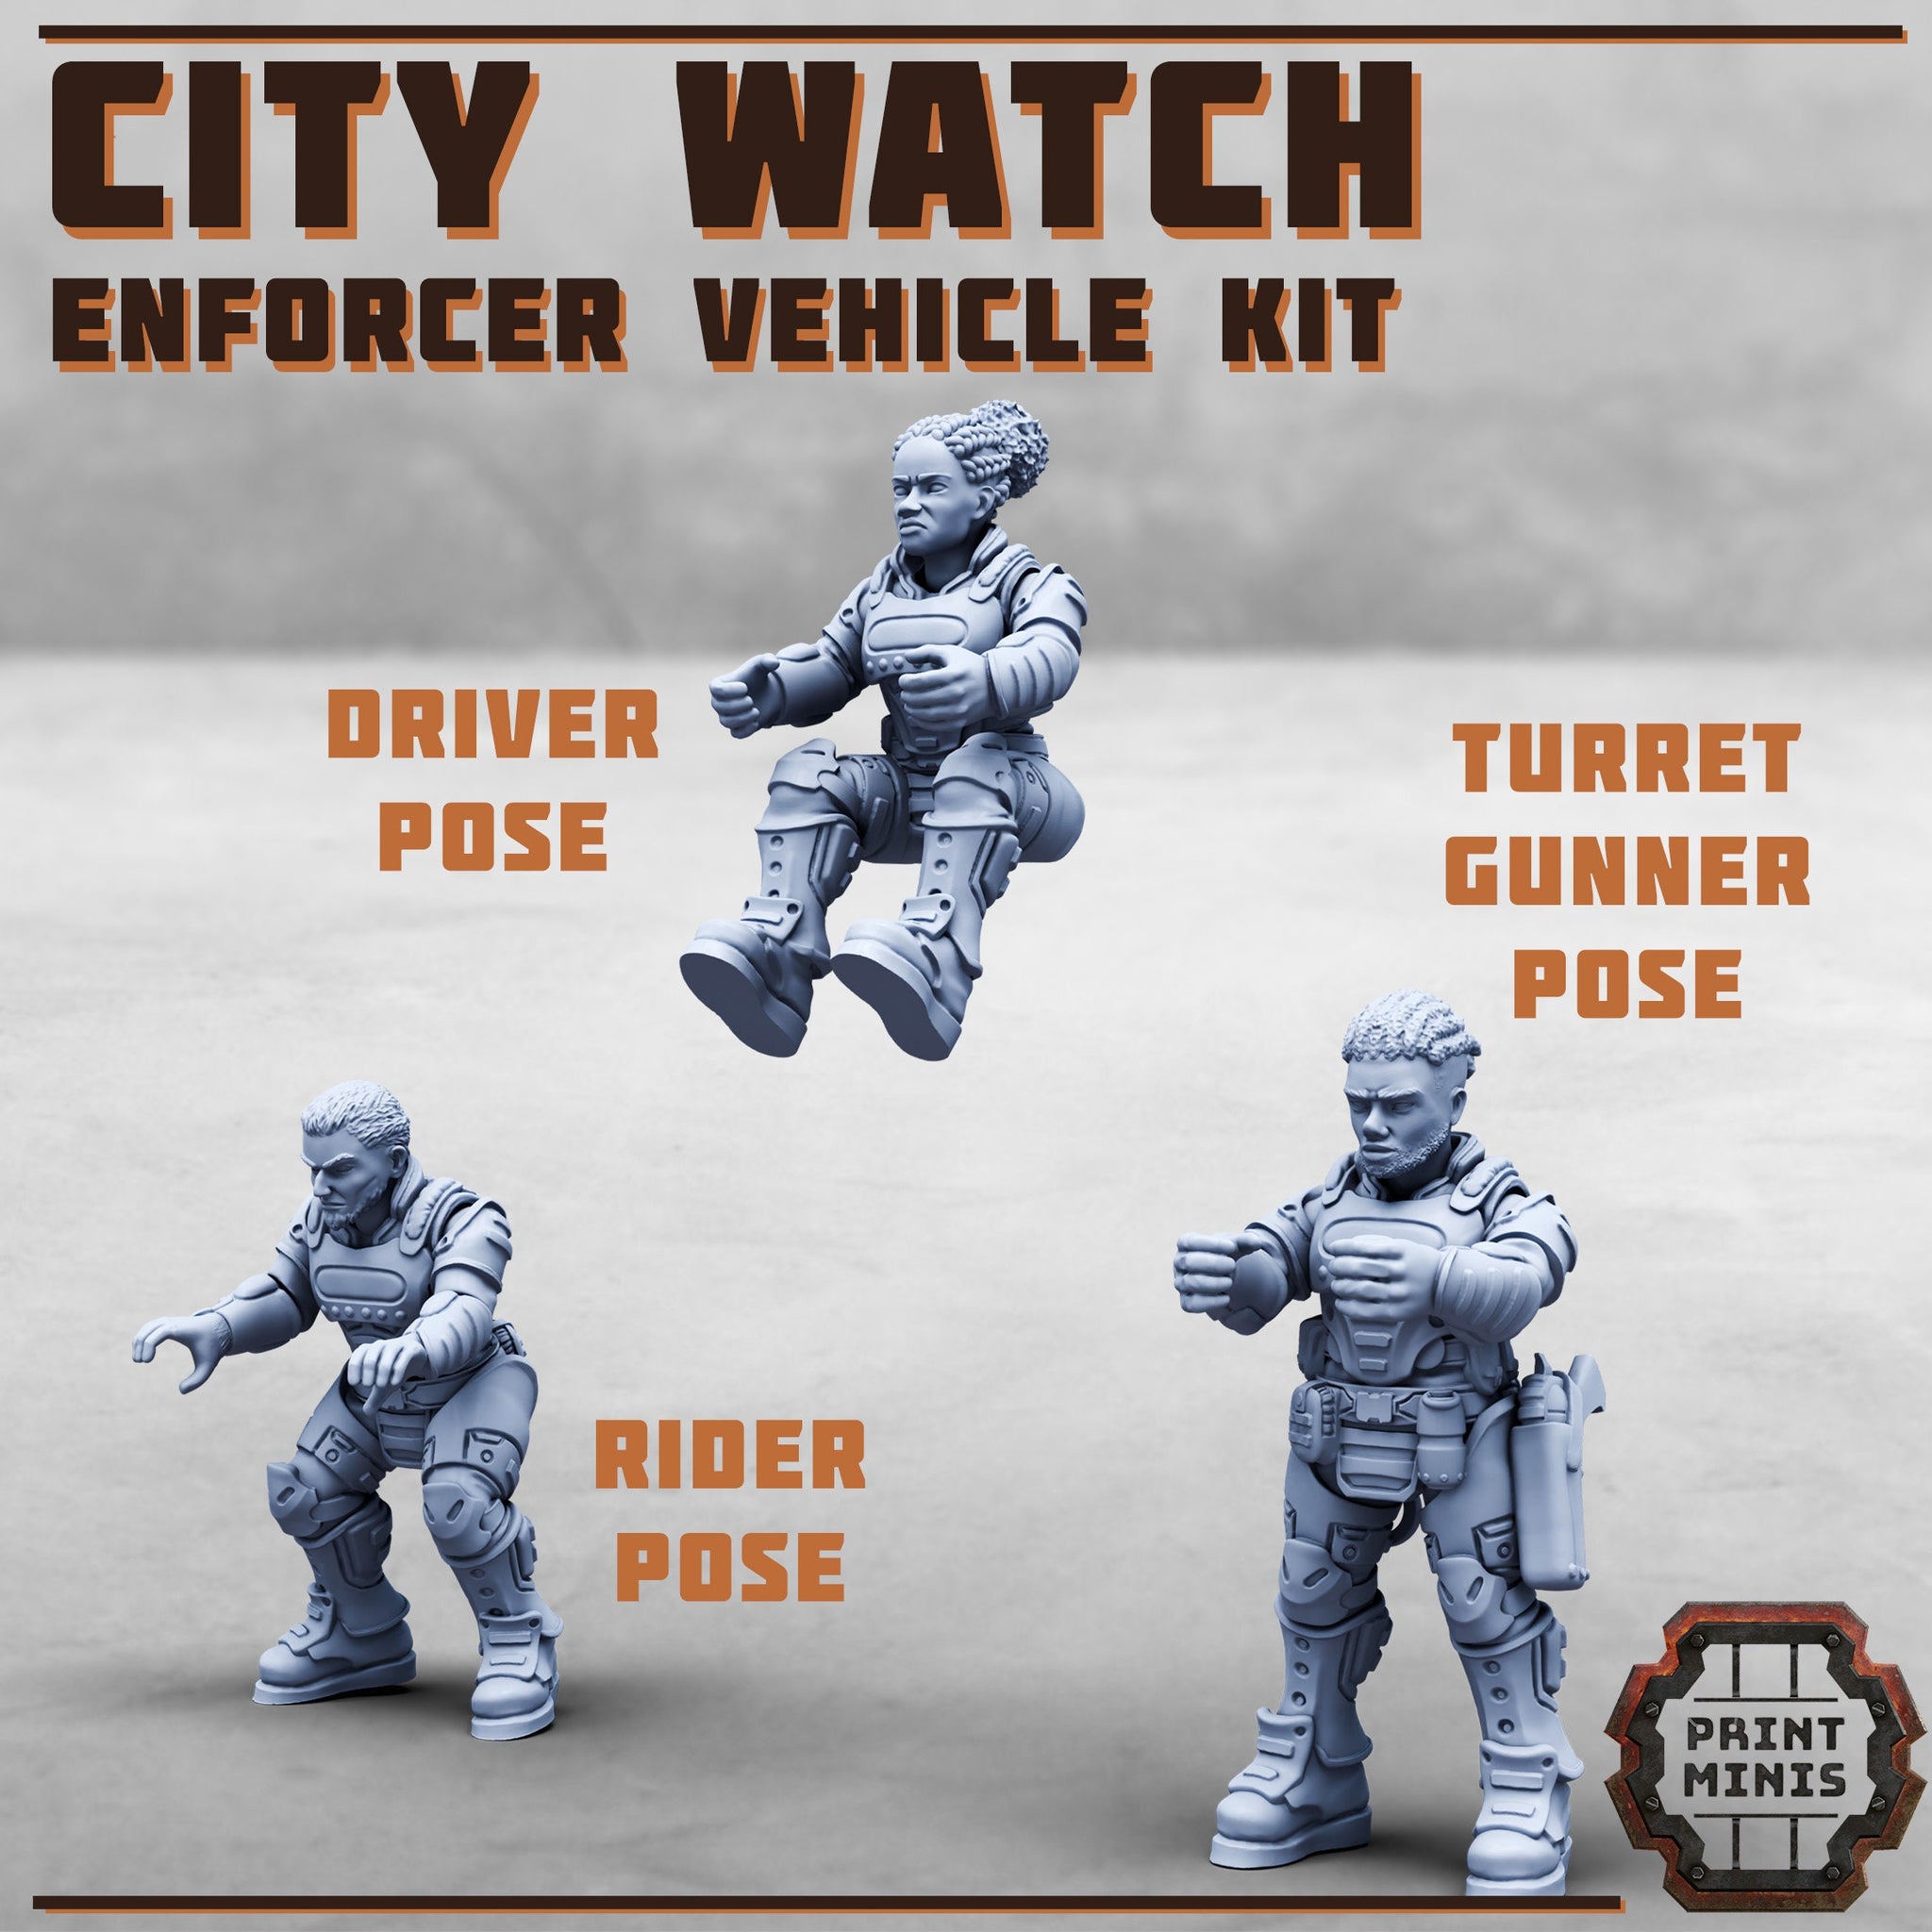 City Watch Enforcer Vehicle poses